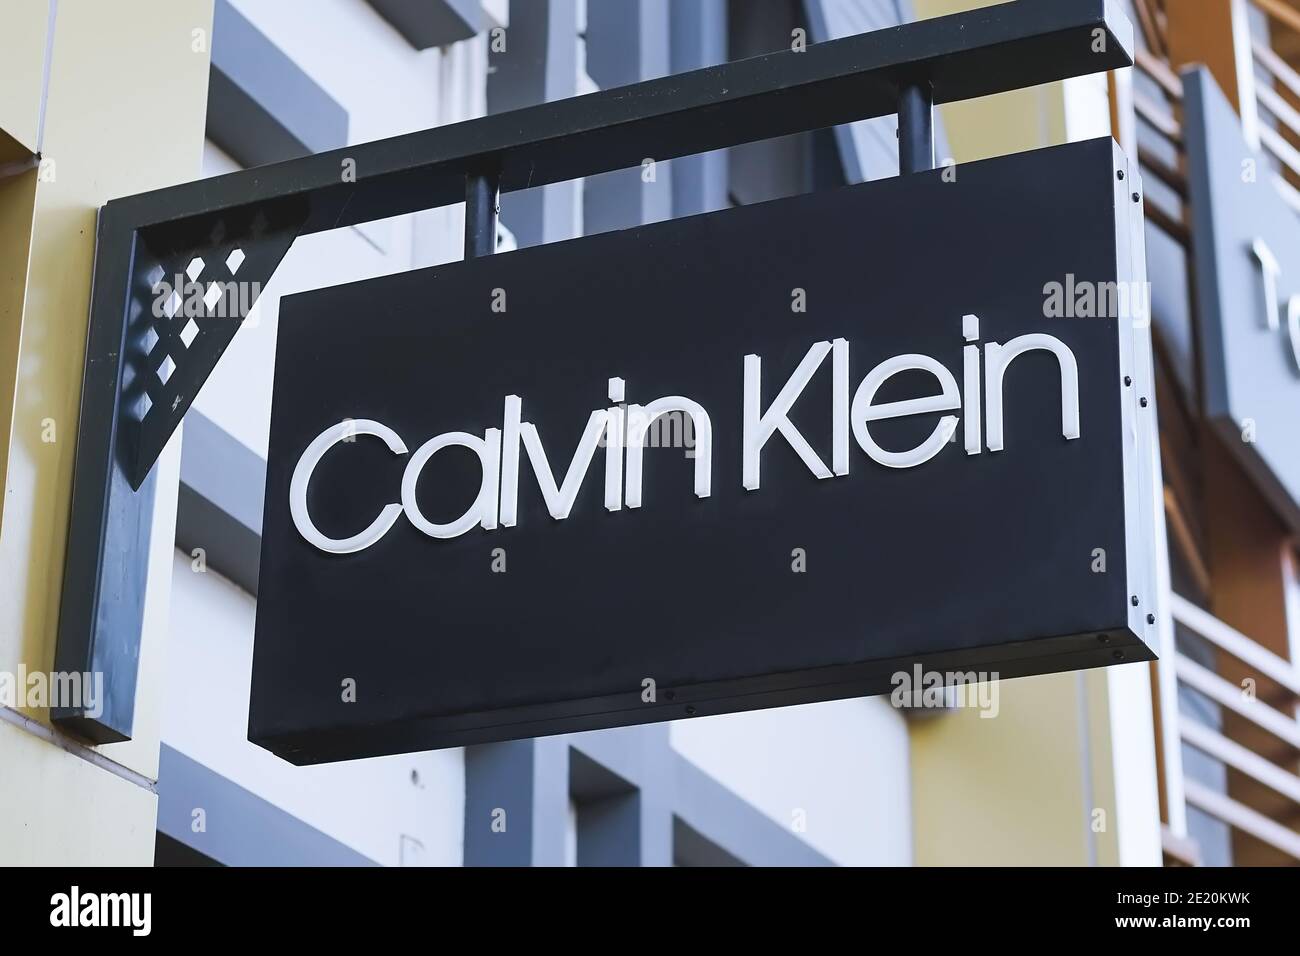 Samut Prakan, Thailand - November 02, 2020: Calvin Klein store in Central Village Shopping Mall, a famous American luxury brand of high fashion clothi Stock Photo